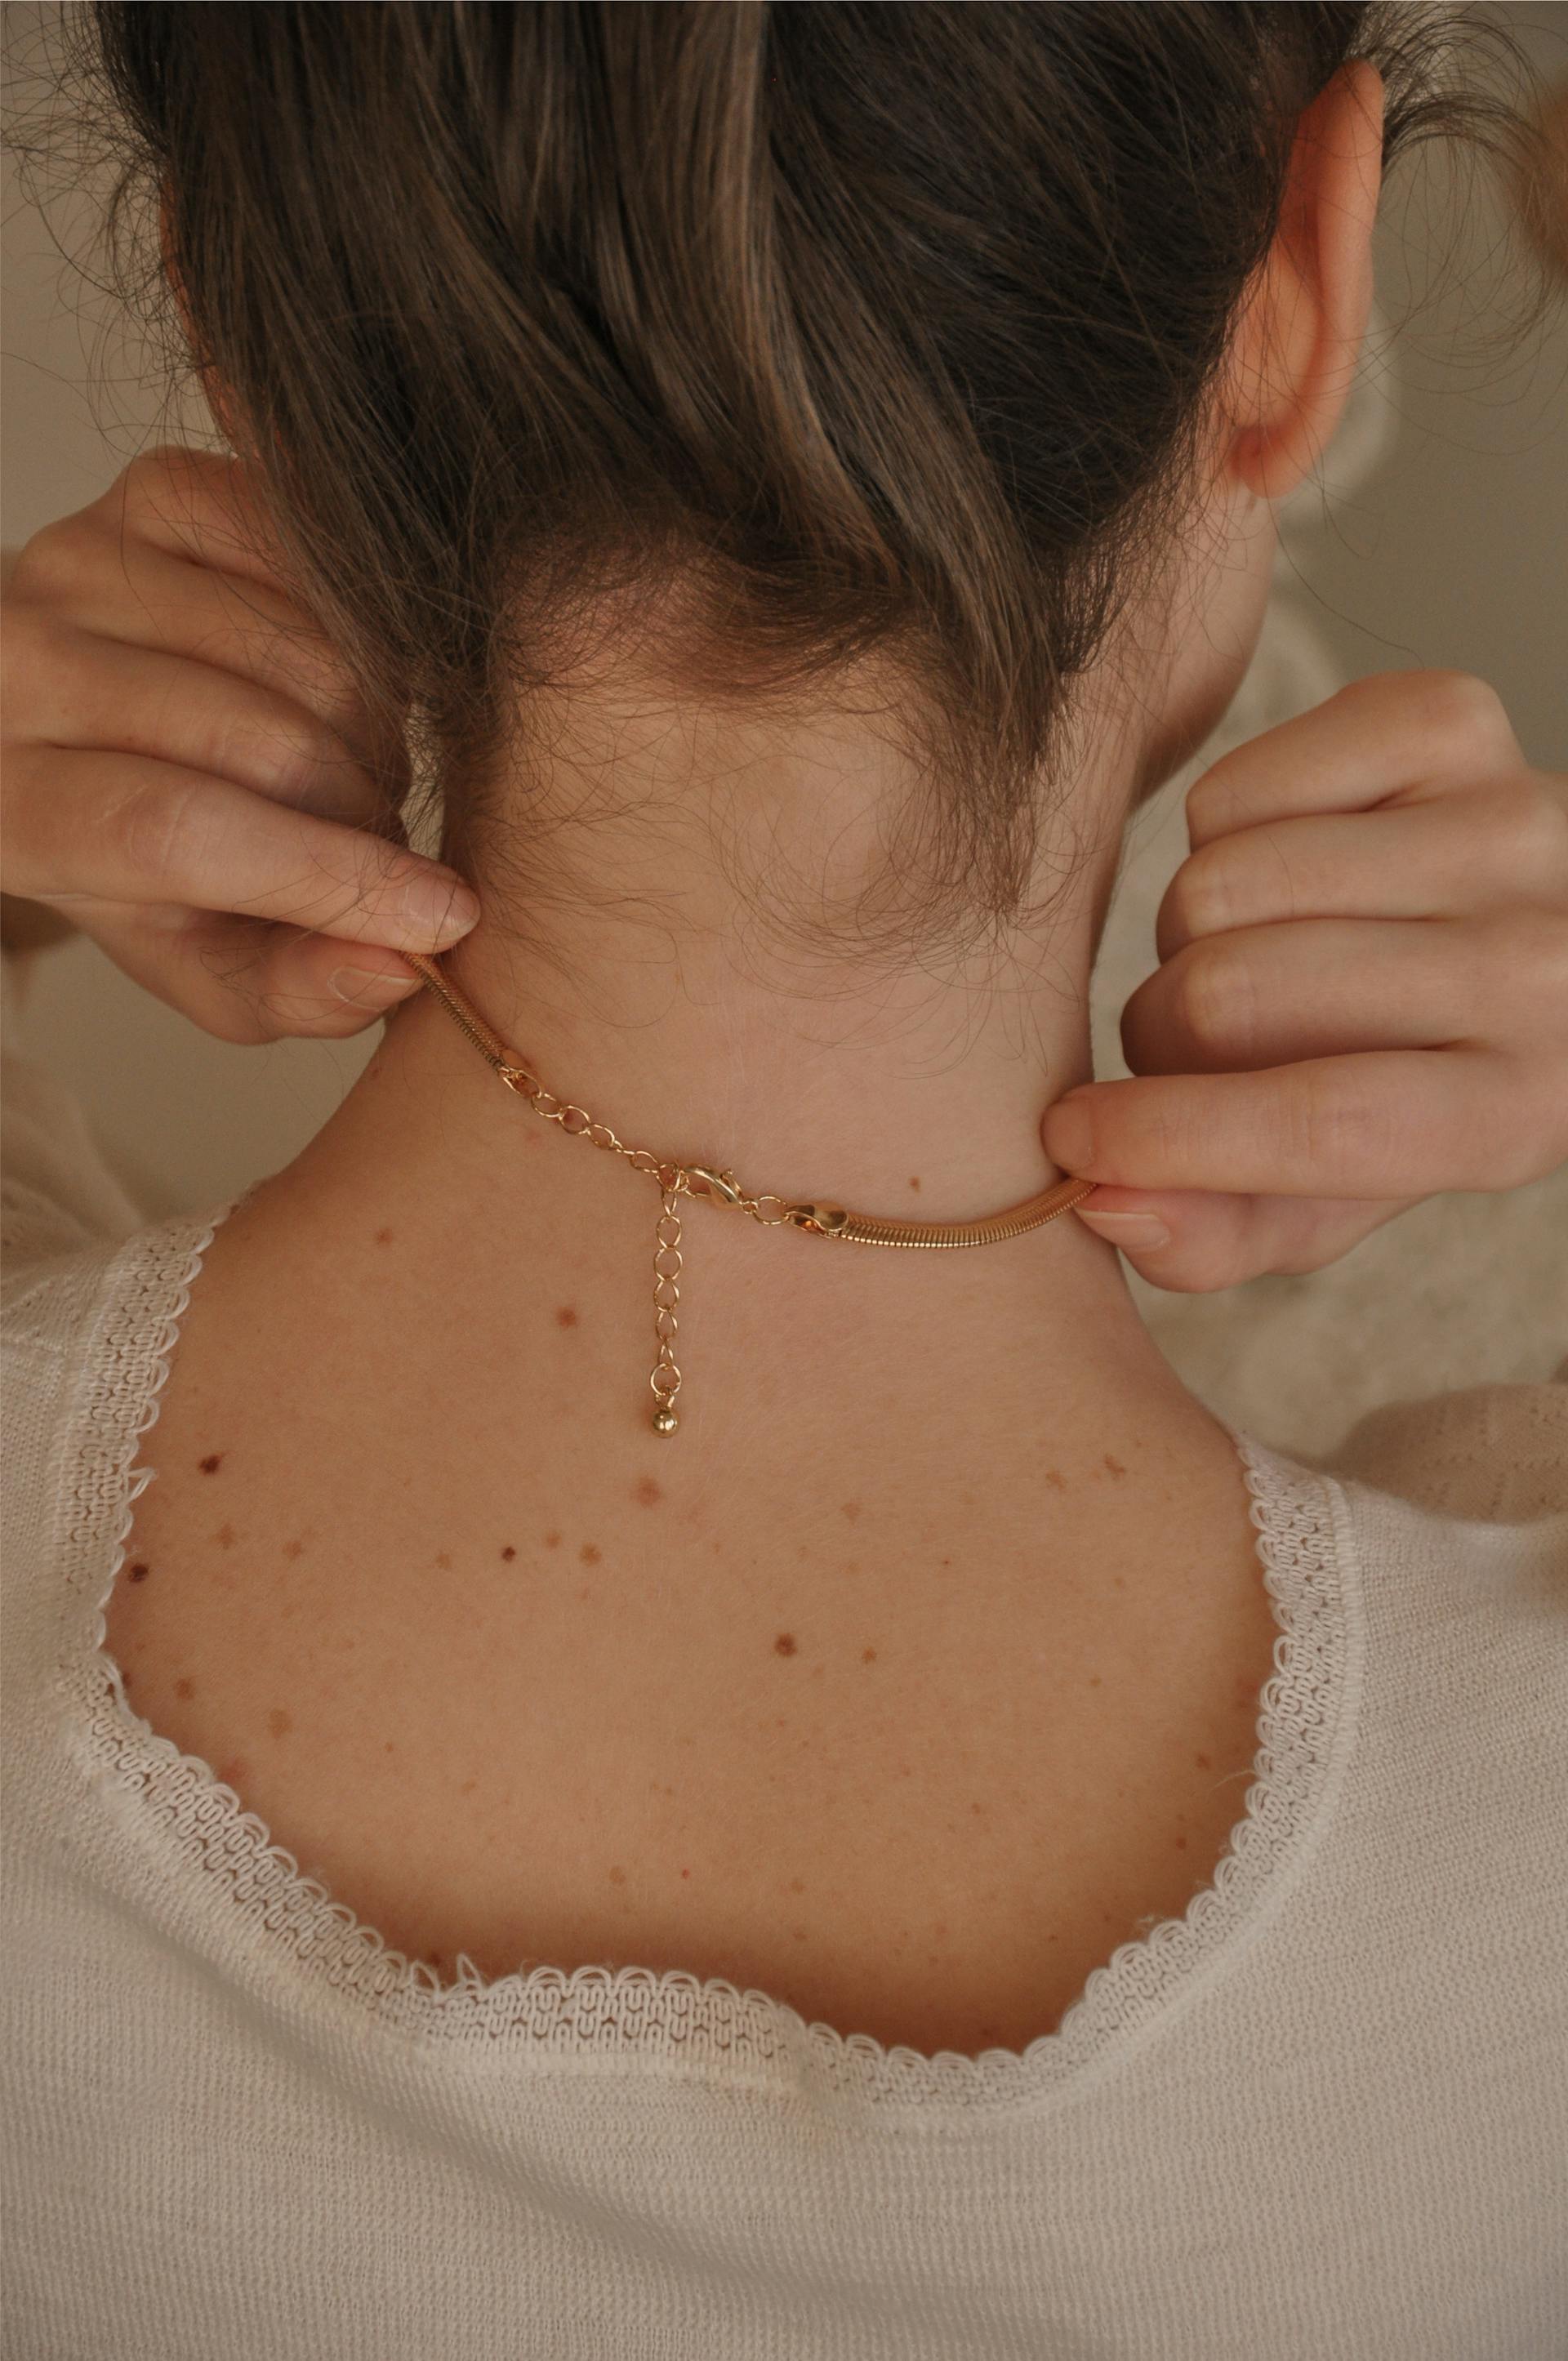 A back view of a woman touching her necklace | Source: Pexels